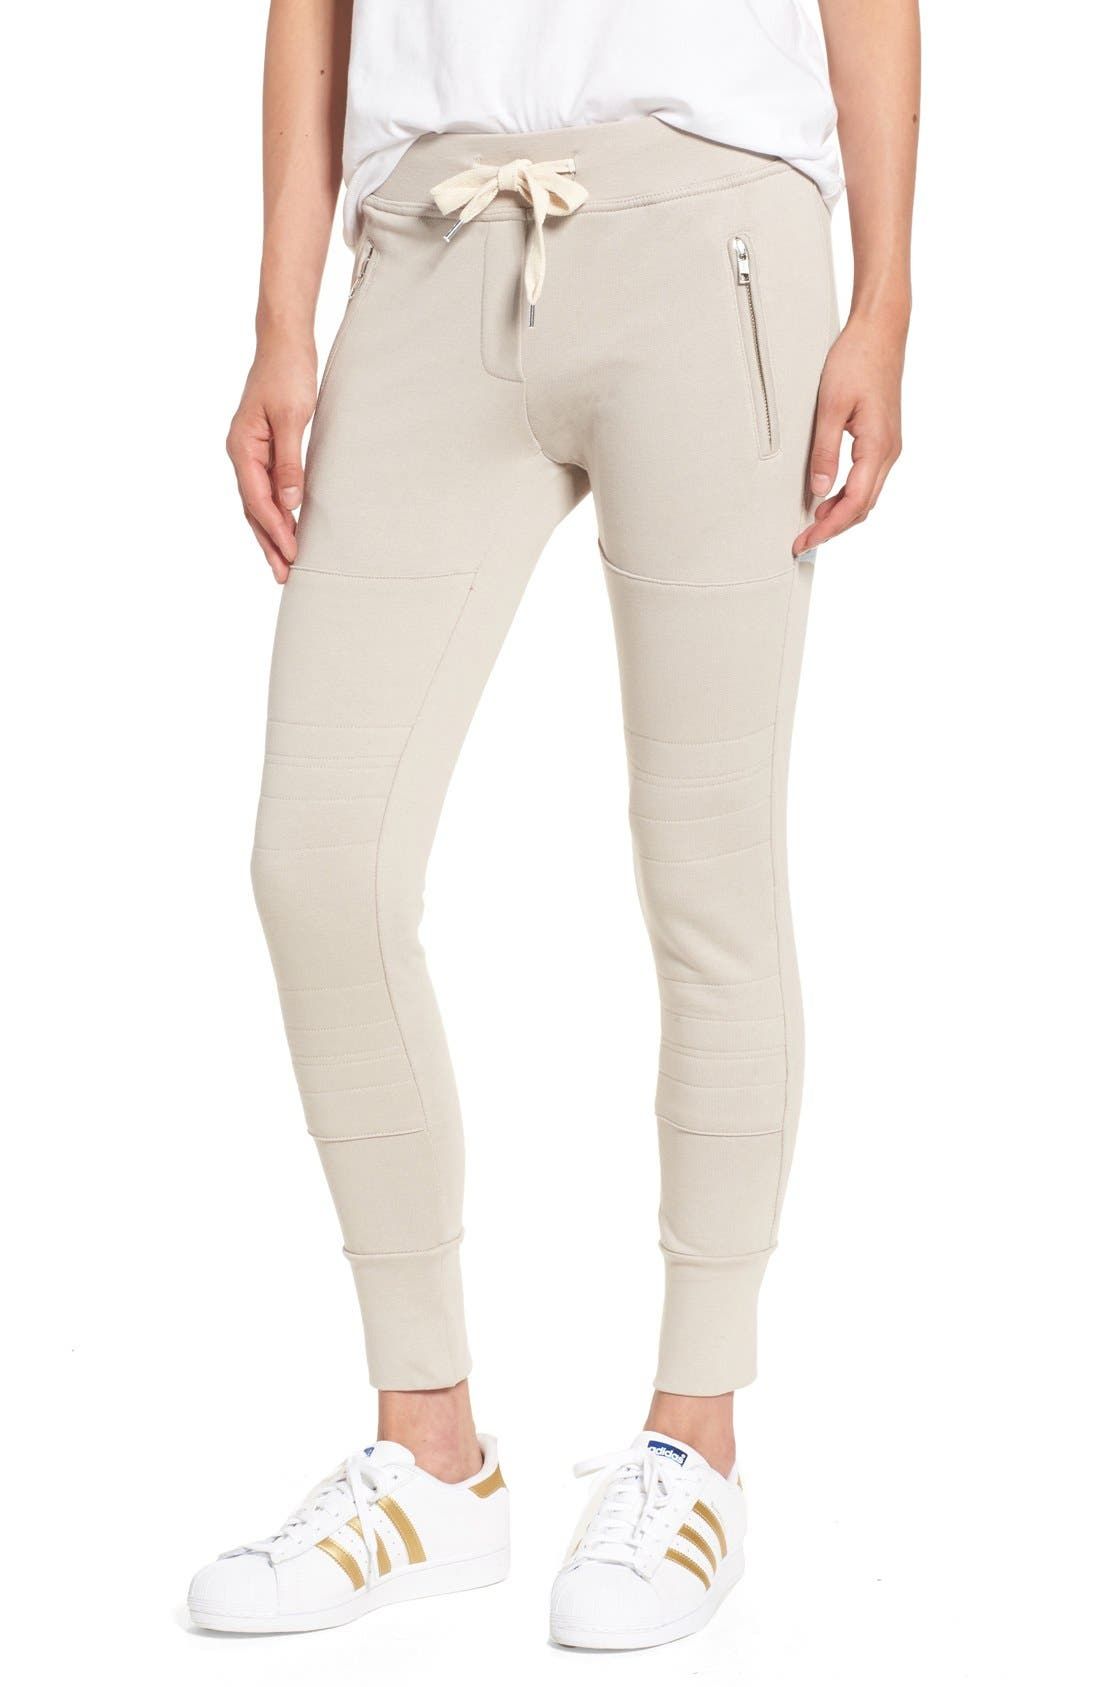 'Lux' Skinny Cotton Jogger Pants | Nordstrom